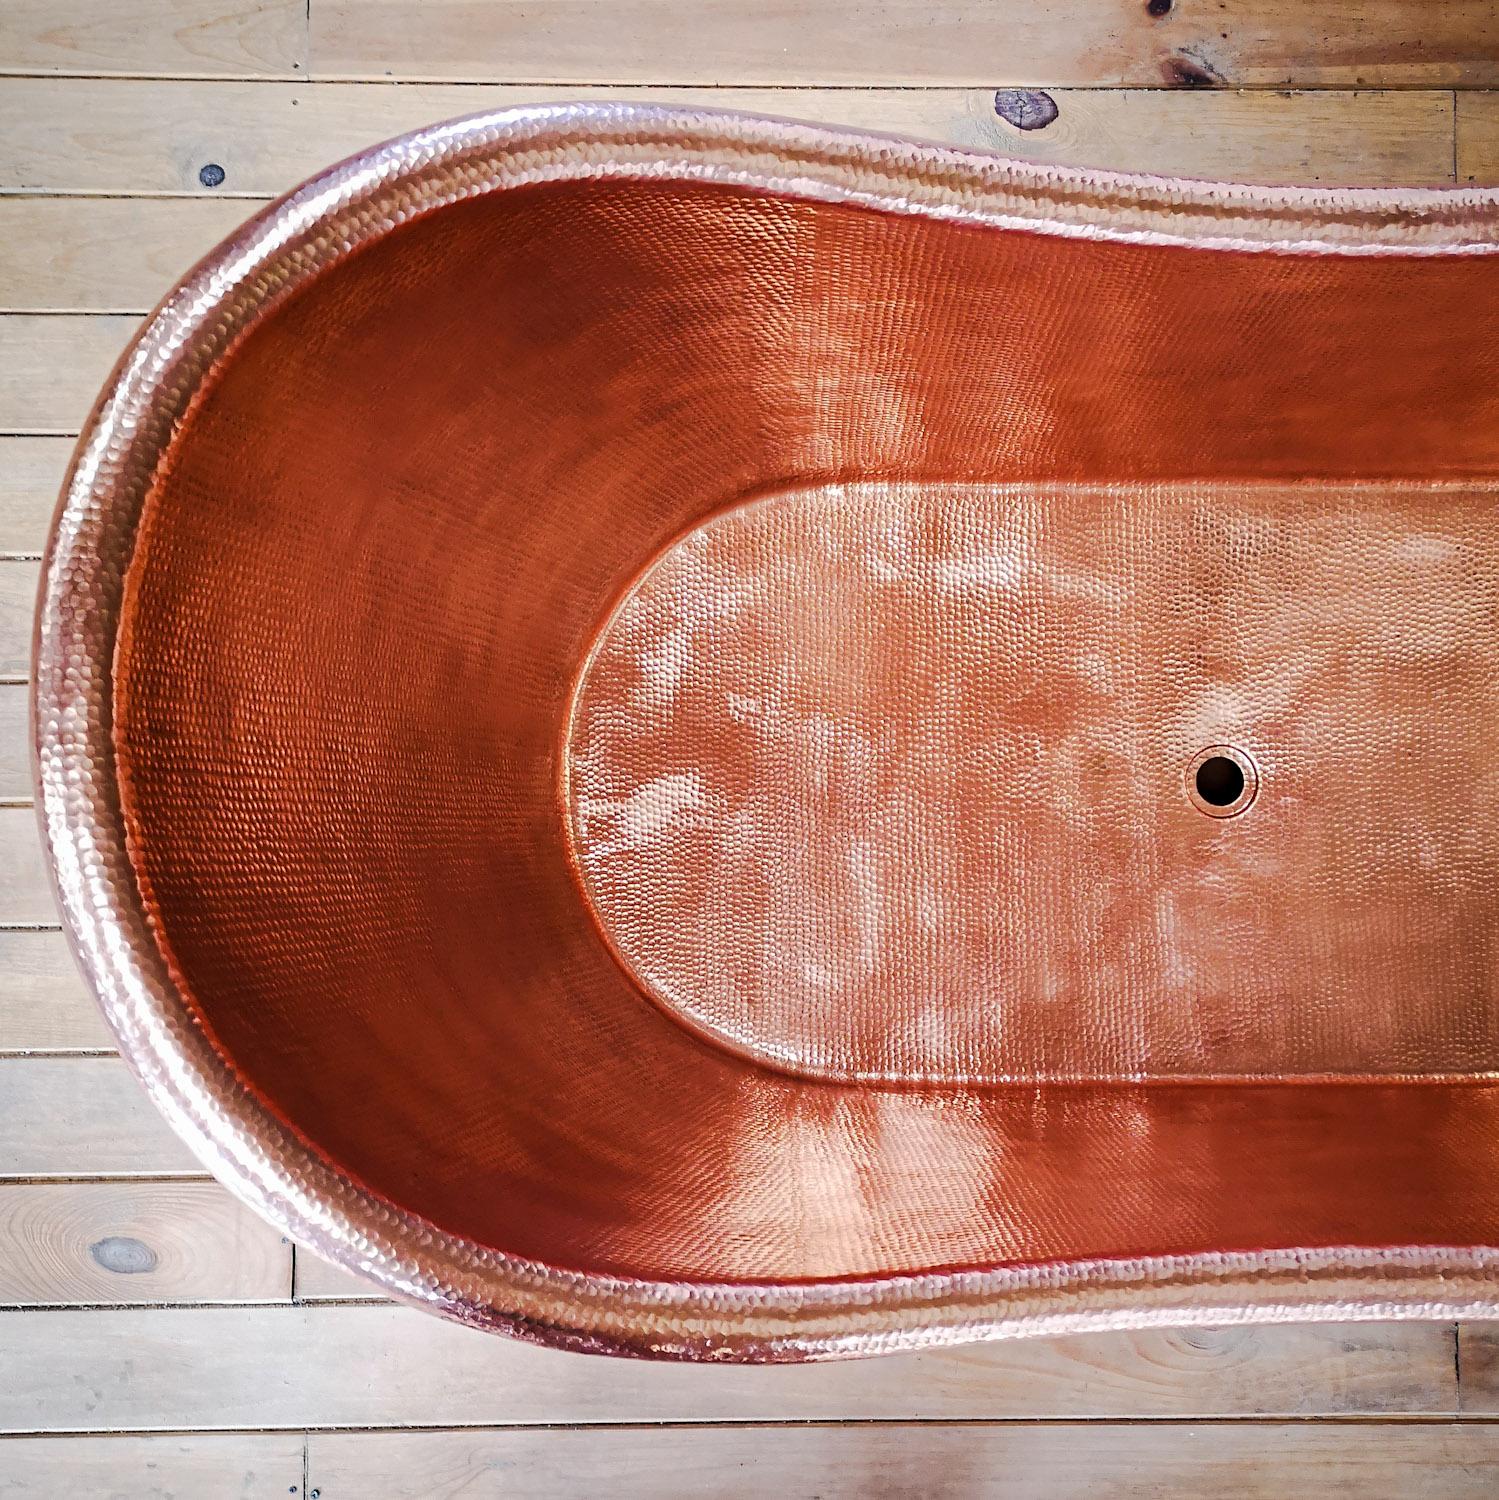 Add a turn of the century charm to your bathroom. Our artisan-crafted Classica is a visual delight for any lover of vintage aesthetics.  This sturdy freestanding tub is made of hand-hammered copper, skillfully crafted by our coppersmiths. Designed